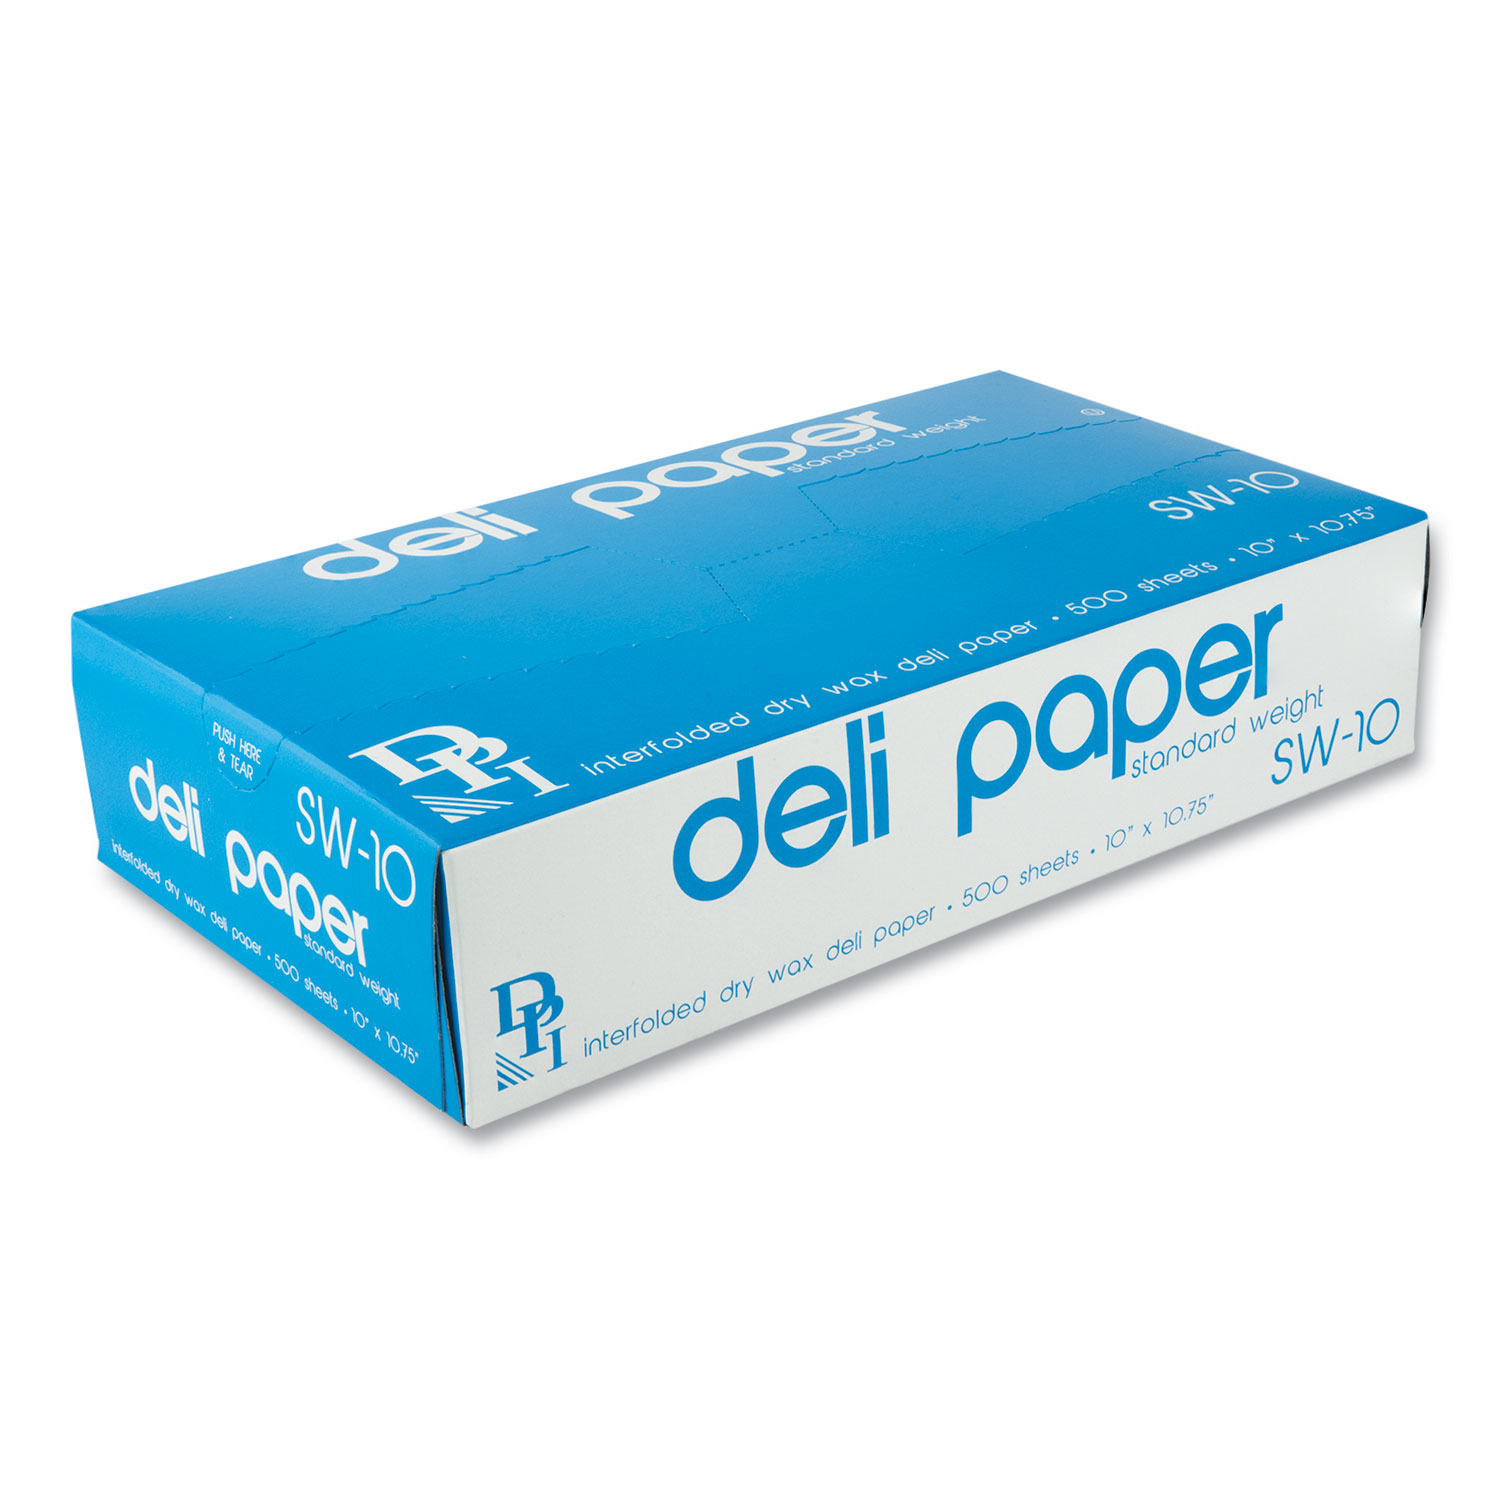  Durable Packaging SW10XX Interfolded Deli Sheets, 10 x 10 3/4, 500 Sheets/Box, 12 Boxes/Carton (DPKSW10XX) 